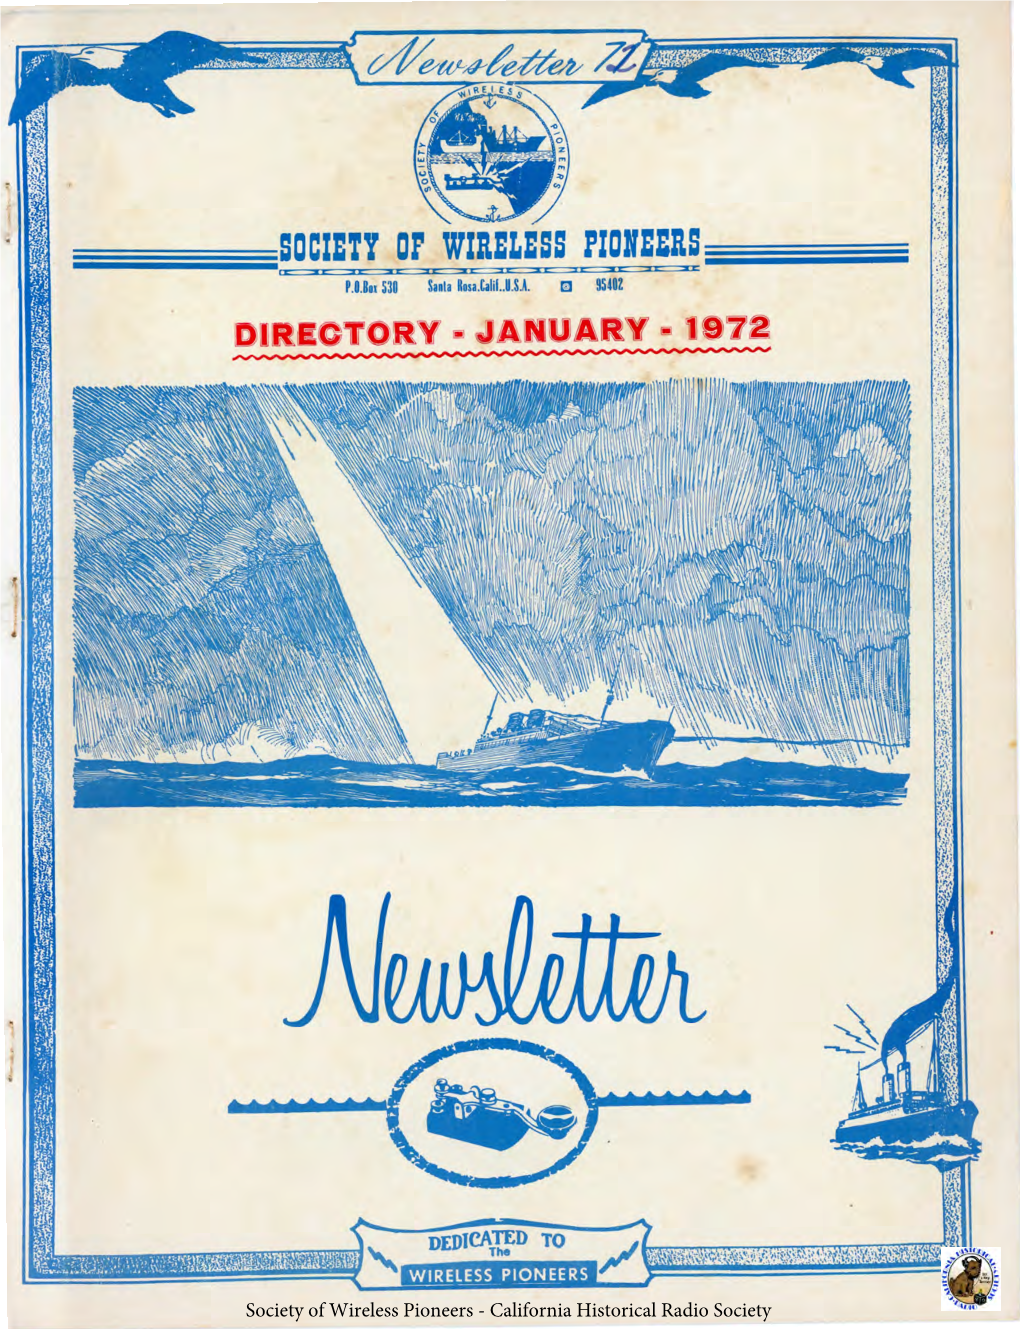 Sowp 1972 Directory and Newsletter